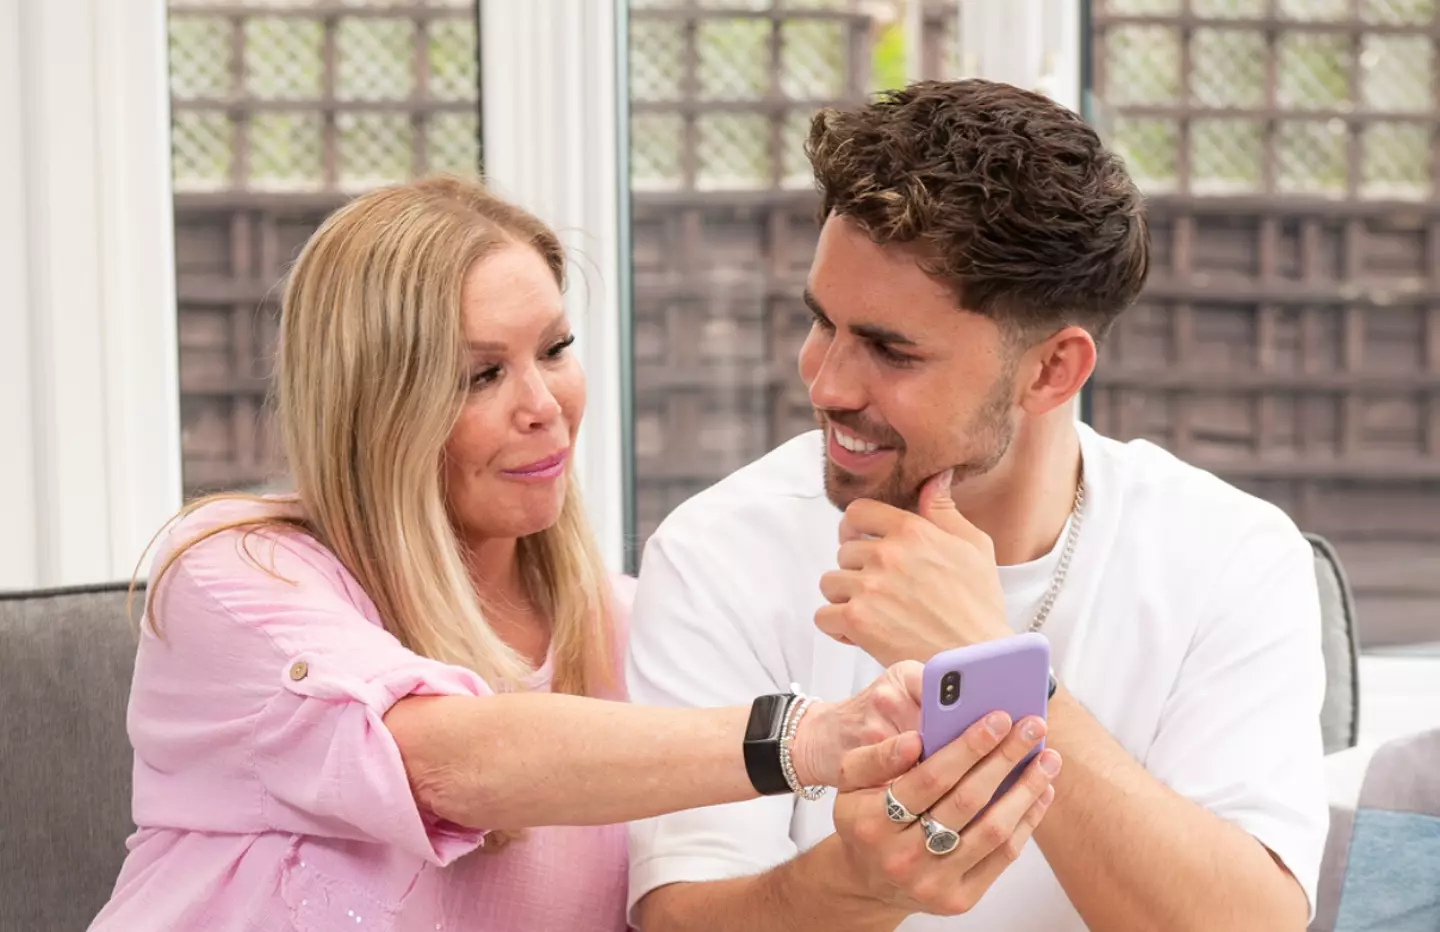 Yes, you read that right, your mum can now get extra involved in your dating life.